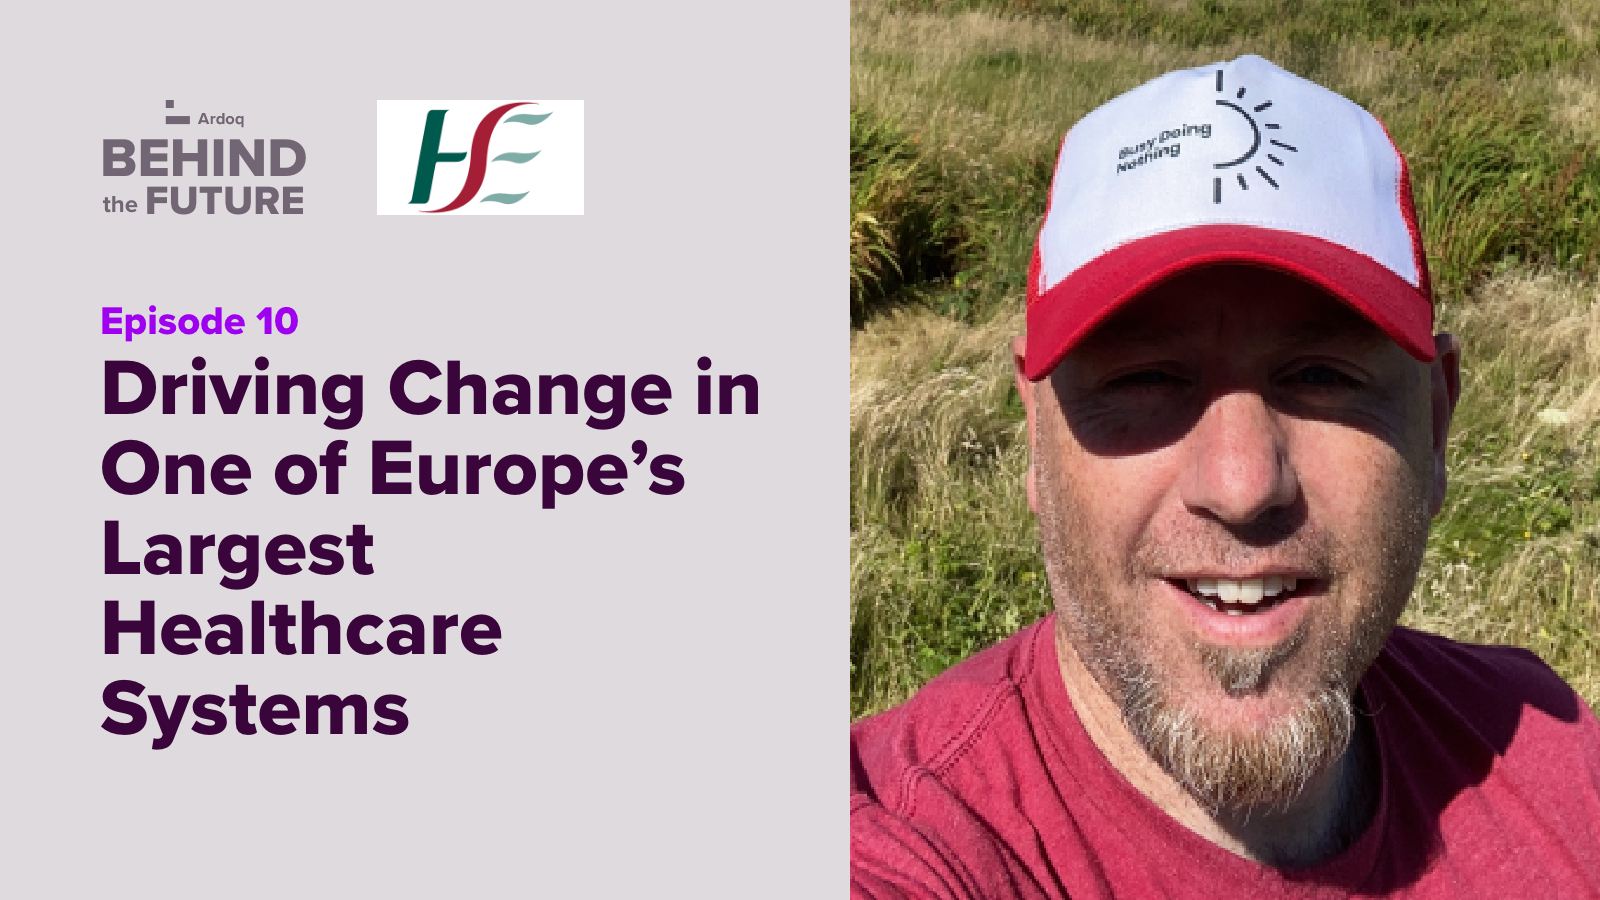 Behind the future 10 driving change in one of europe's largest healthcare systems